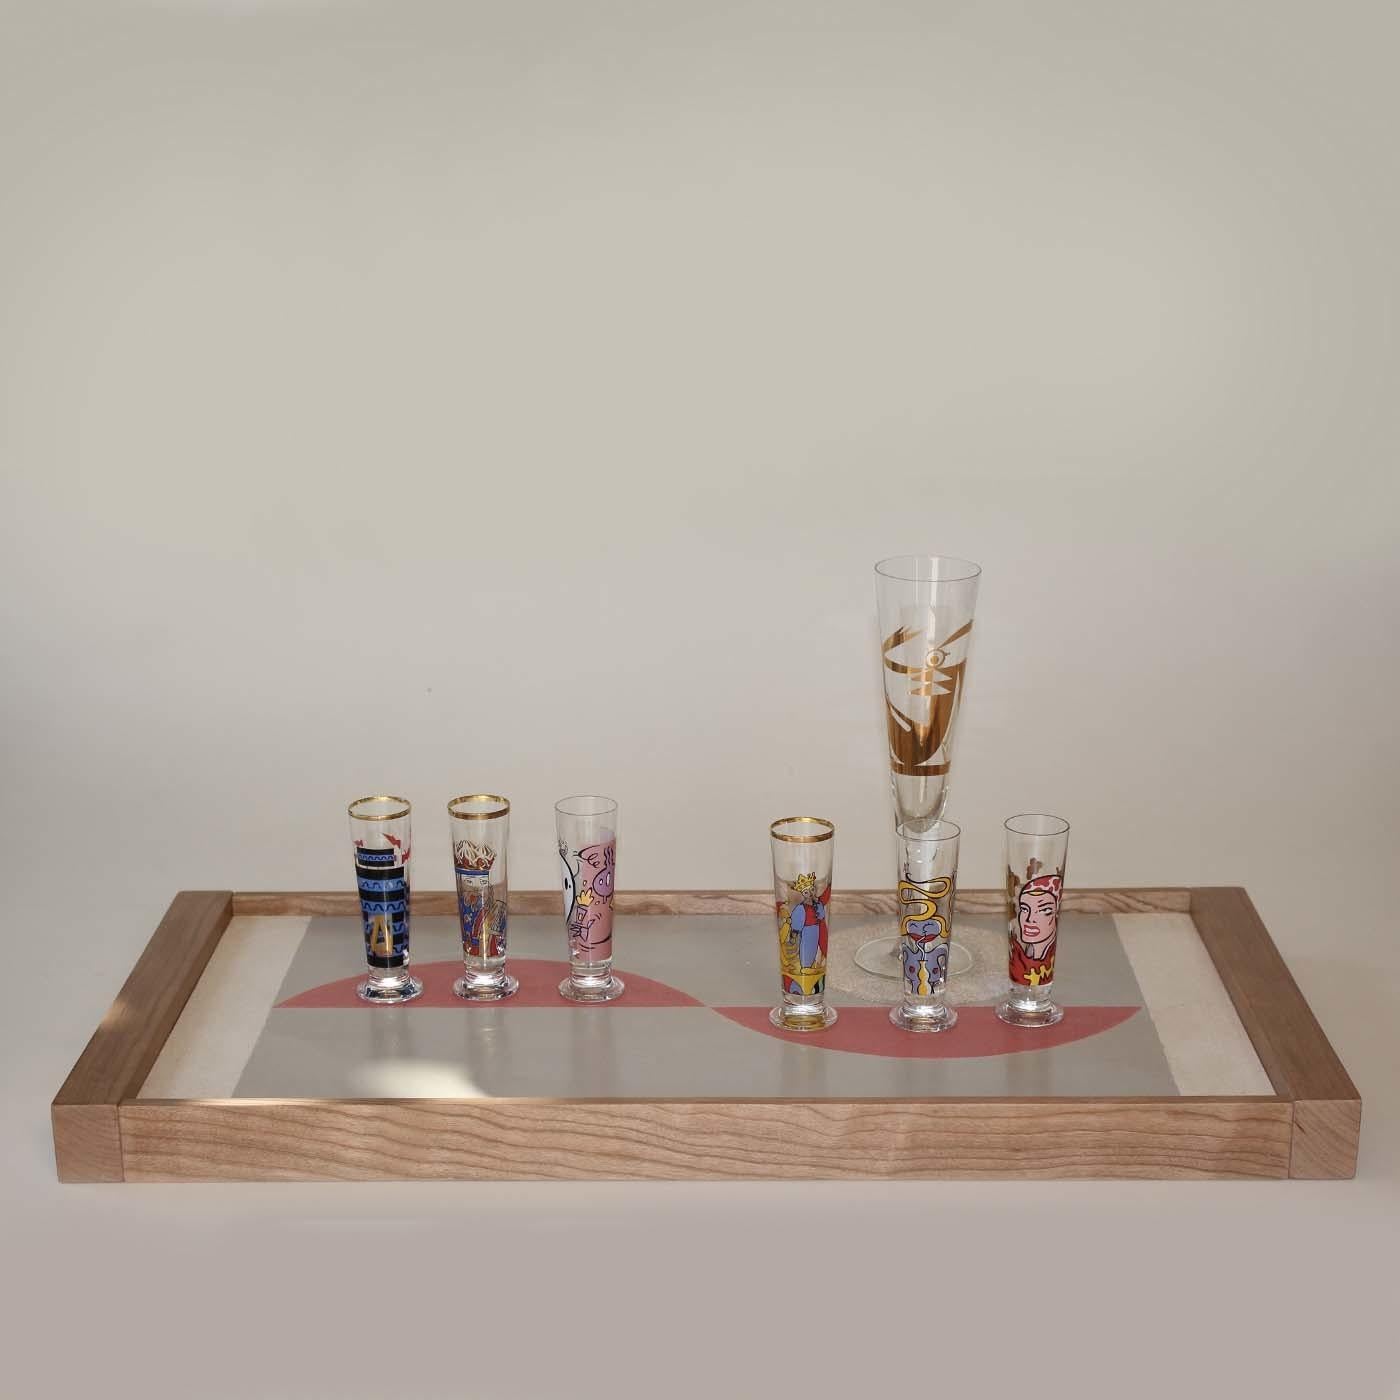 Featuring an abstract design reminiscent of Japanese classic patterns, this hand-painted, rectangular tray handcrafted of cherry will be an elegant piece of functional decor on a dining table and can also be displayed on a shelf as a purely